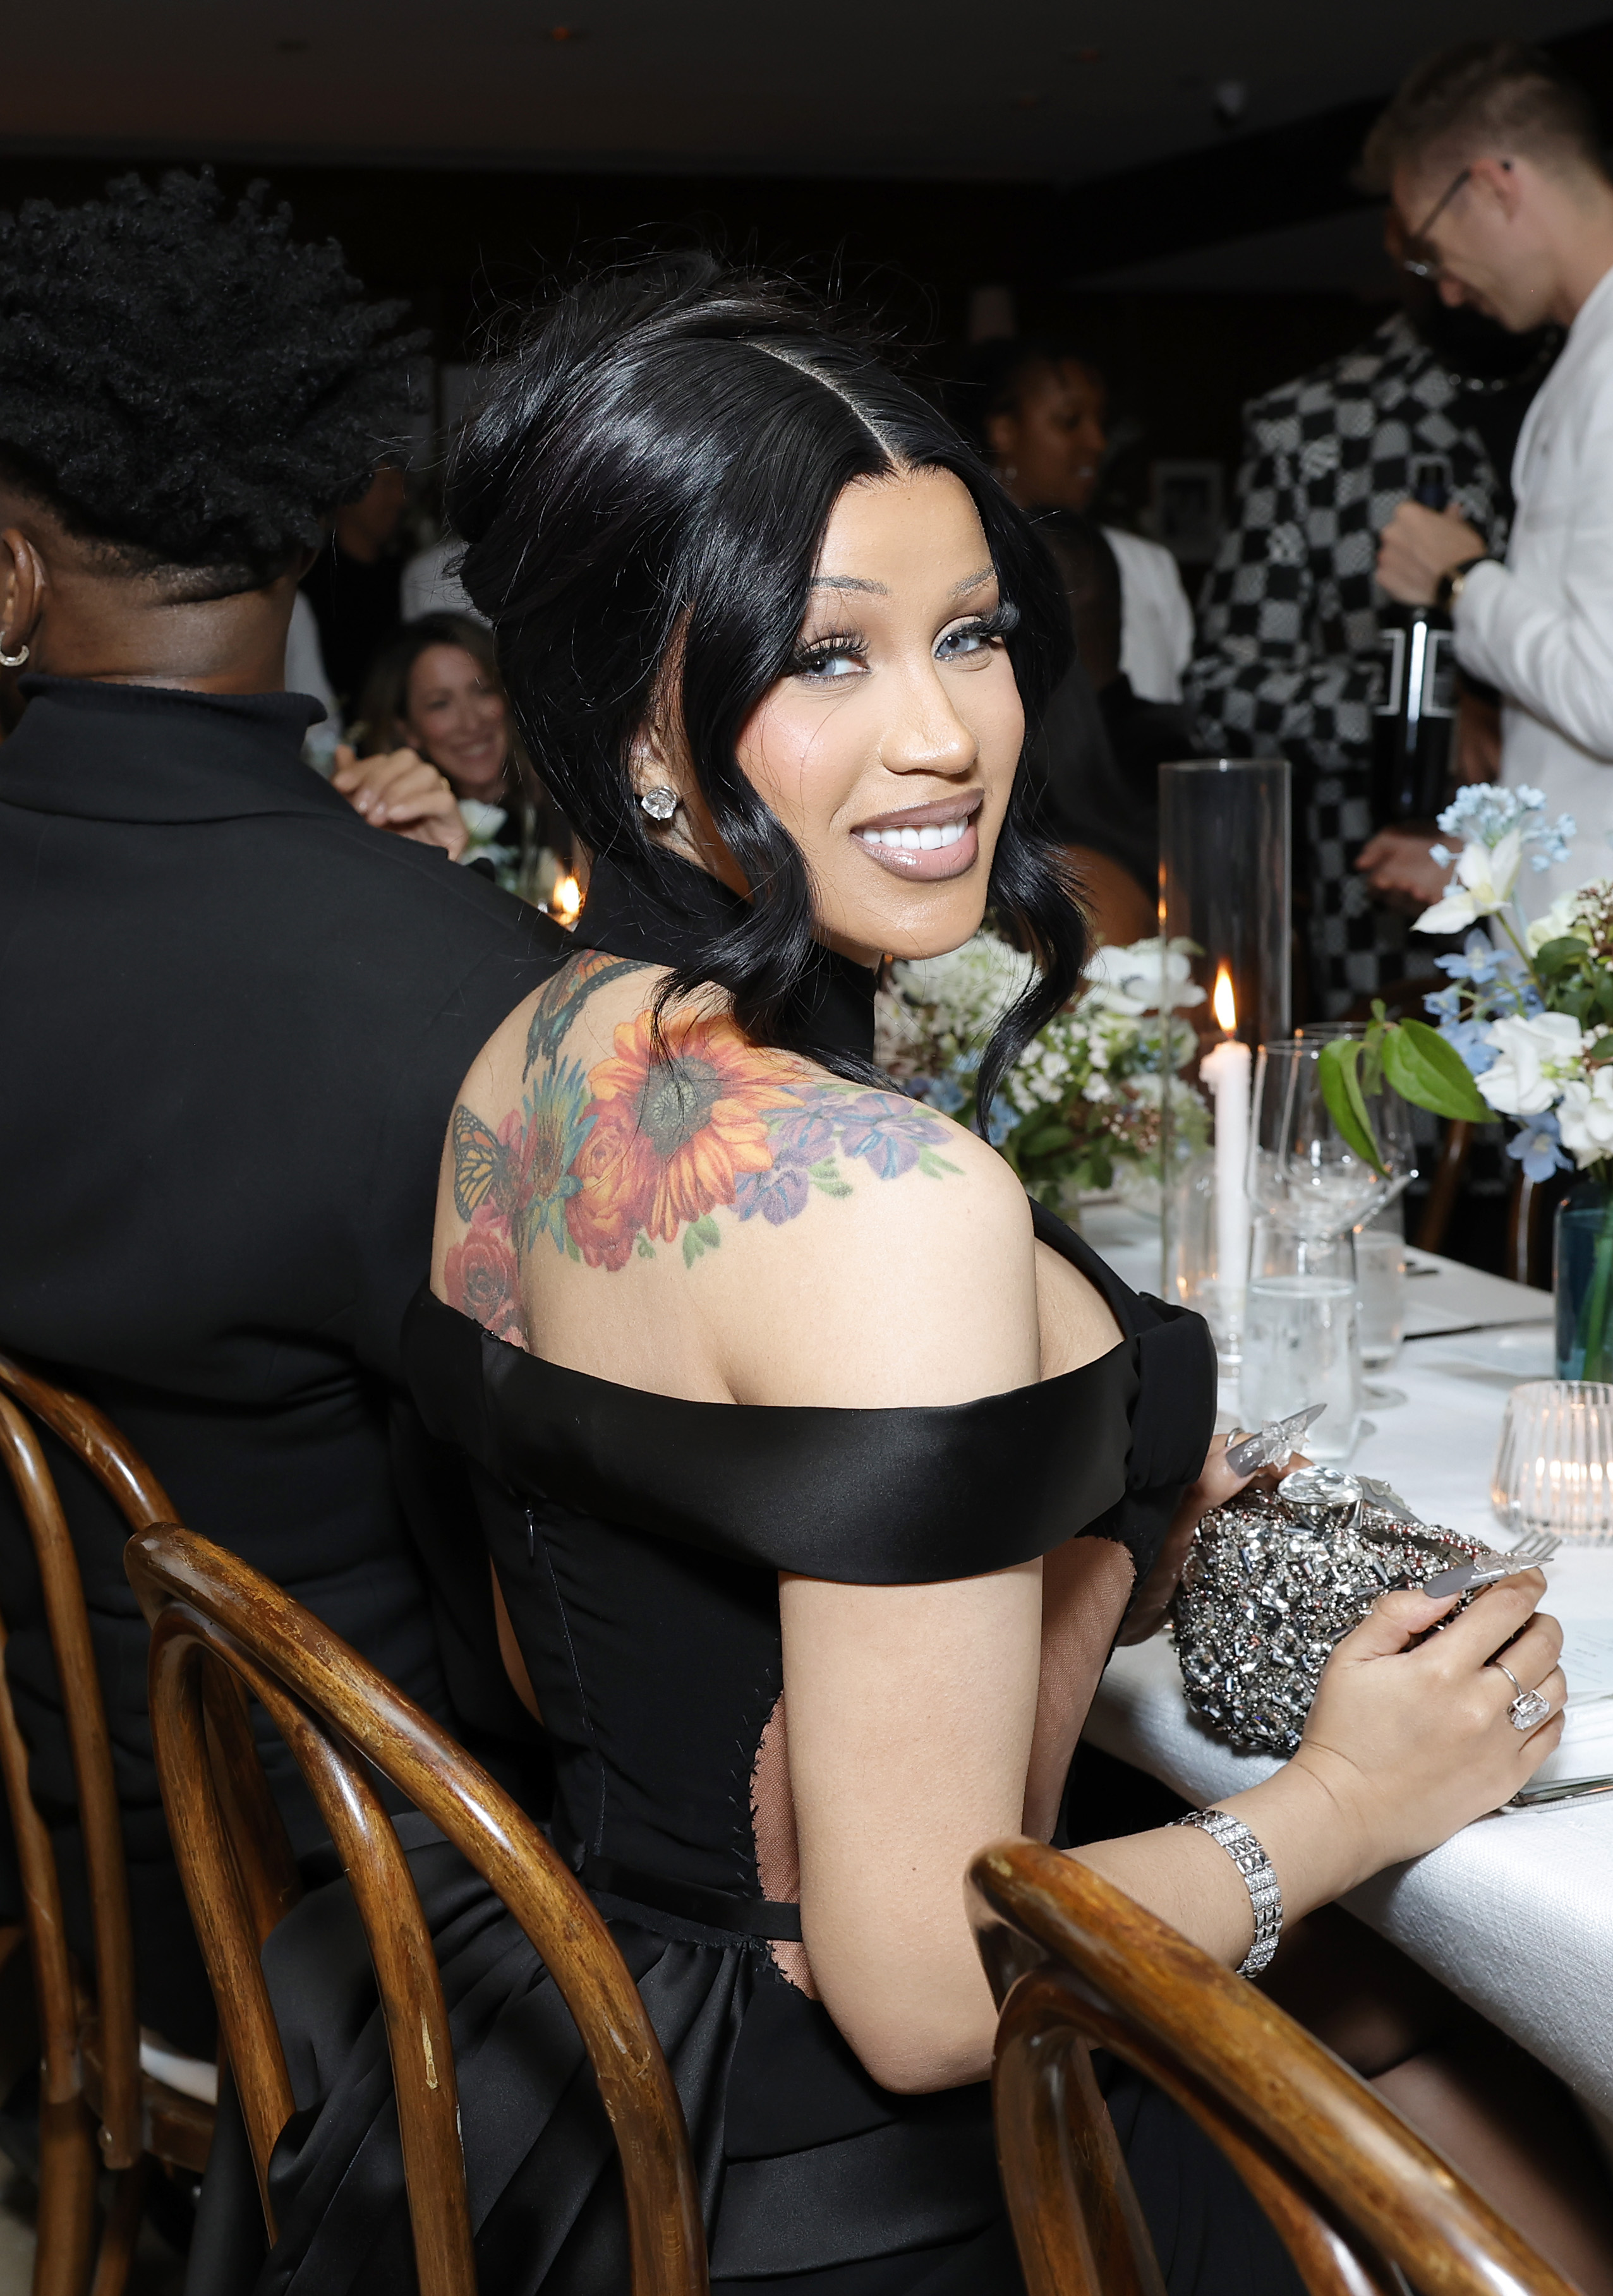 The star has been on-and-off with her ex, Offset, since 2020